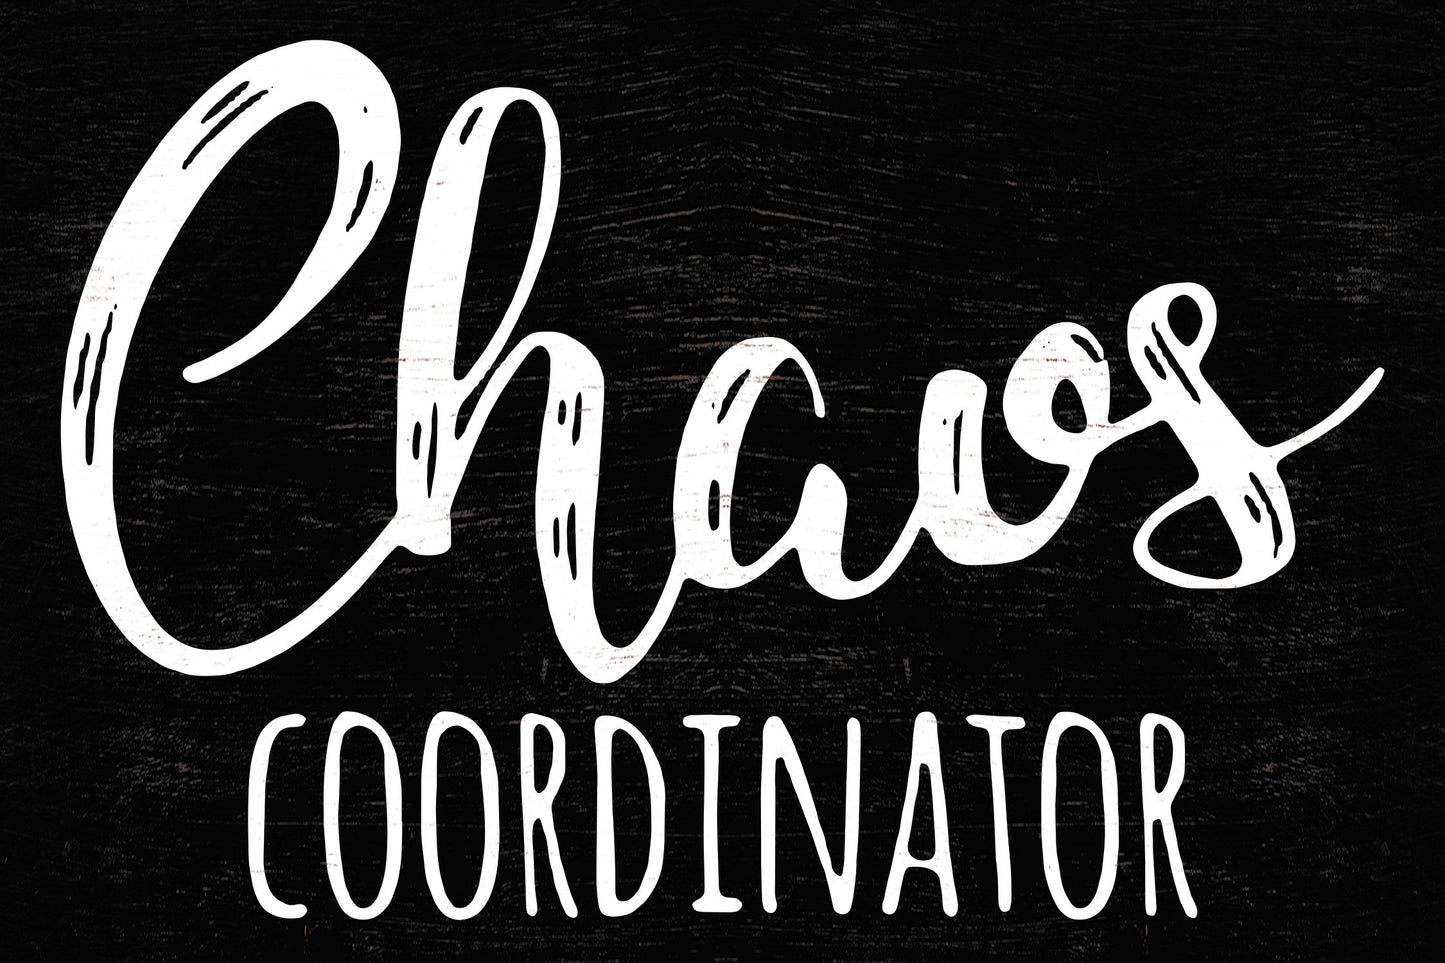 Embrace the Chaos: 7.5in x 5in Wooden Wall Decor Sign - "Chaos Coordinator" - Clever & Fun